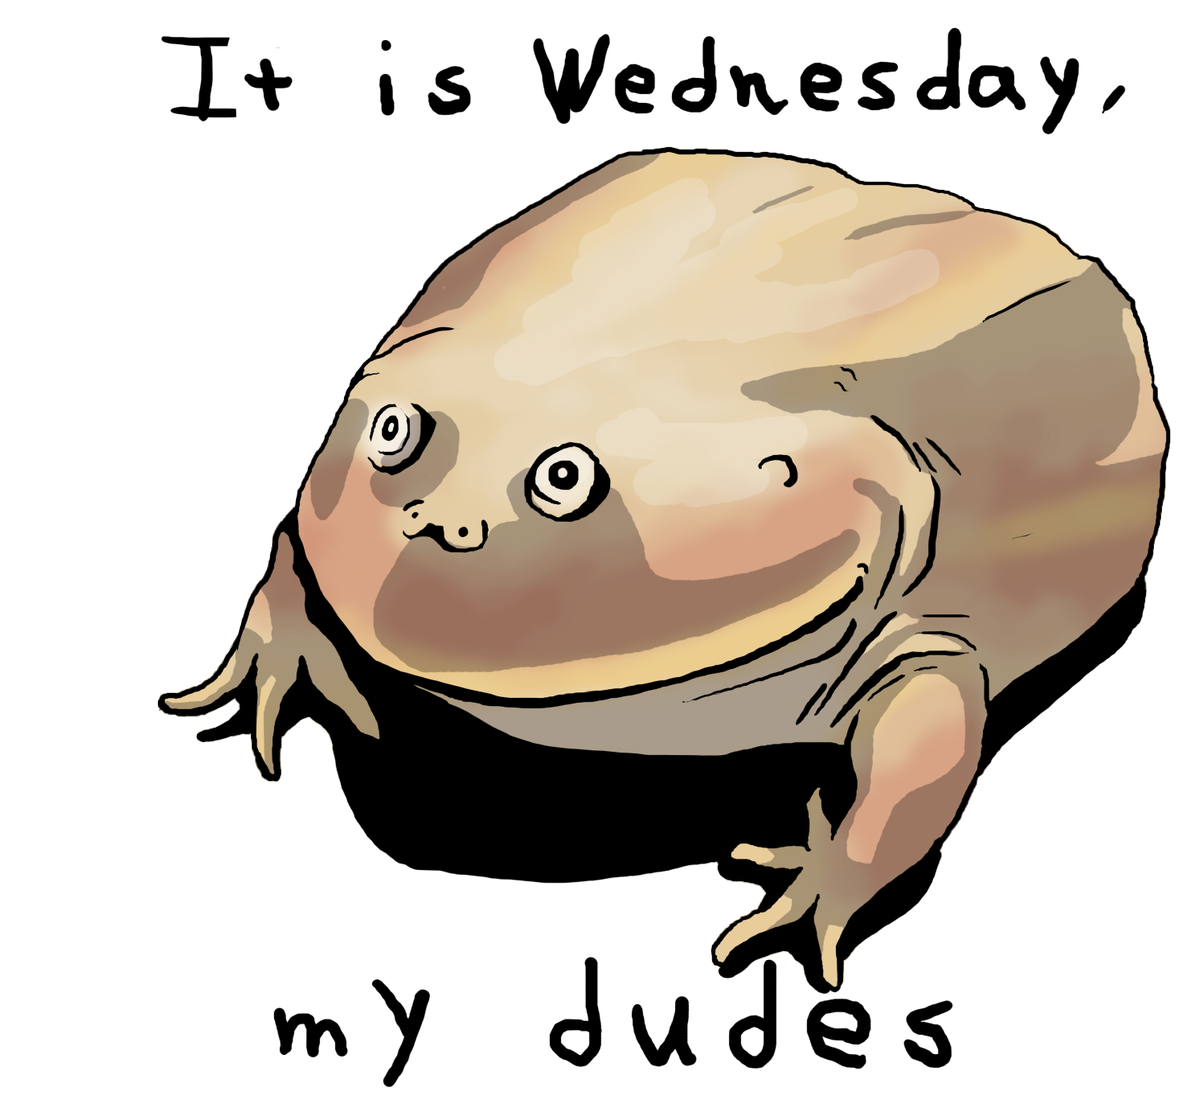 Wednesday Frog Meme PNG